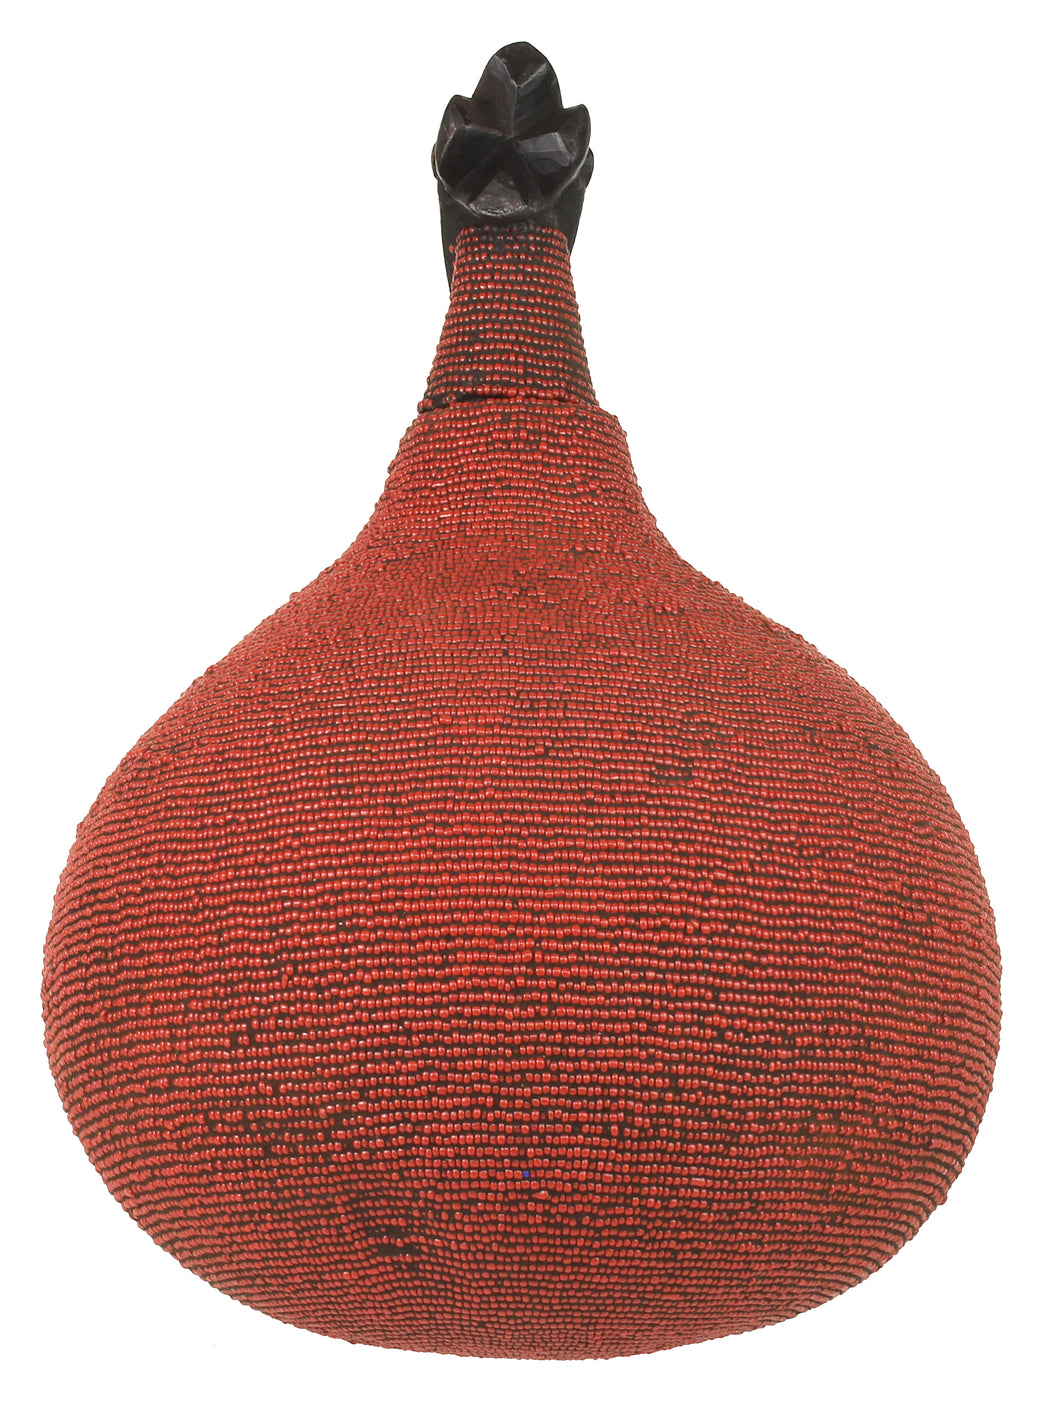 Beaded Decor Gourd from Congo, Africa - Red - Niger Bend